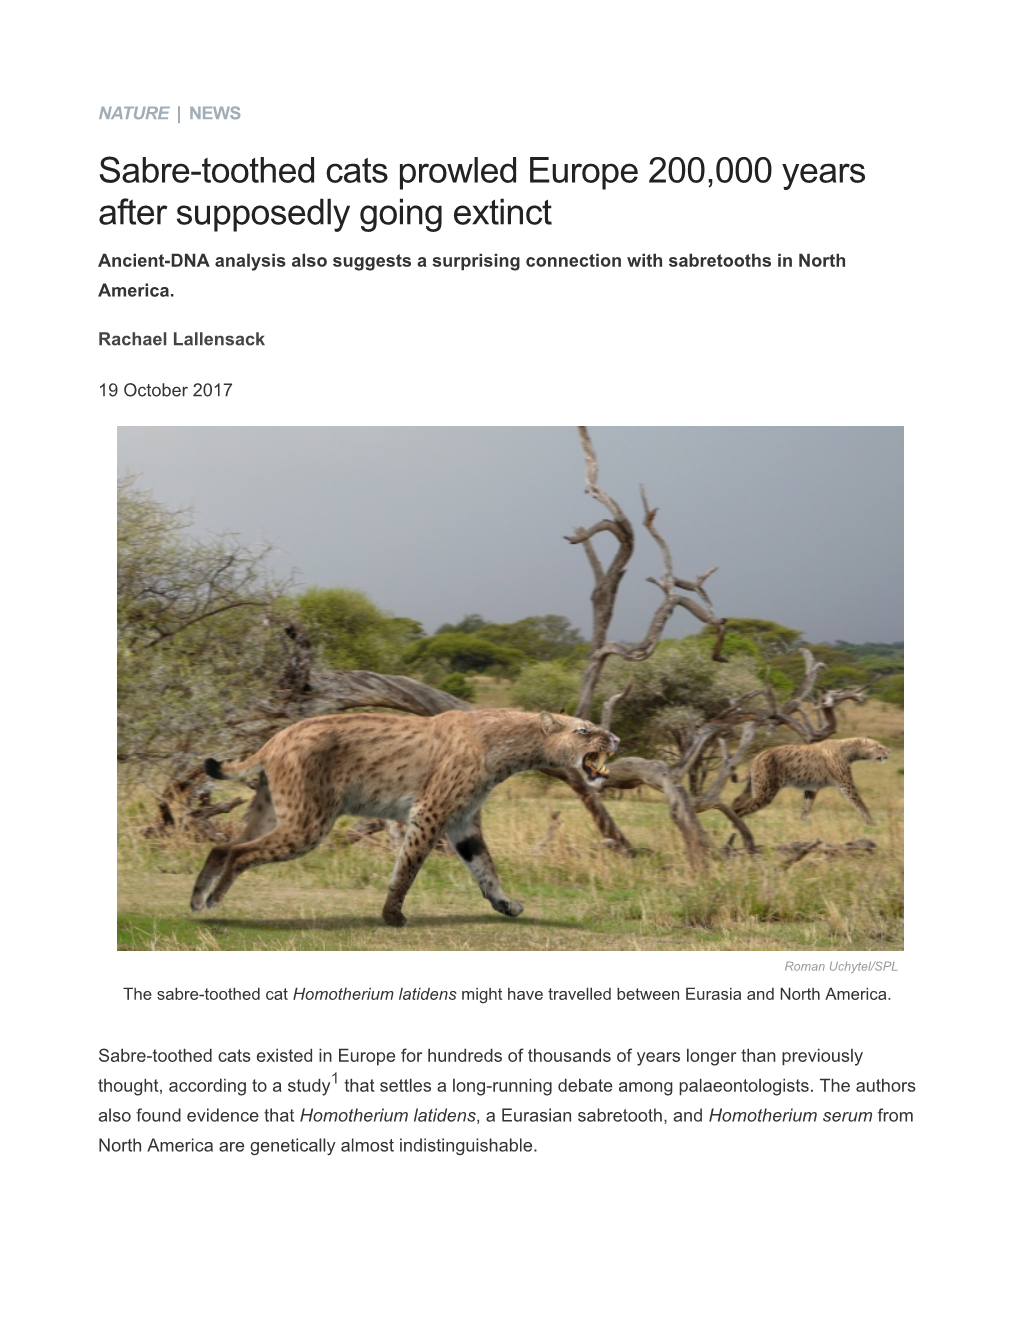 Sabre-Toothed Cats Prowled Europe 200,000 Years After Supposedly Going Extinct